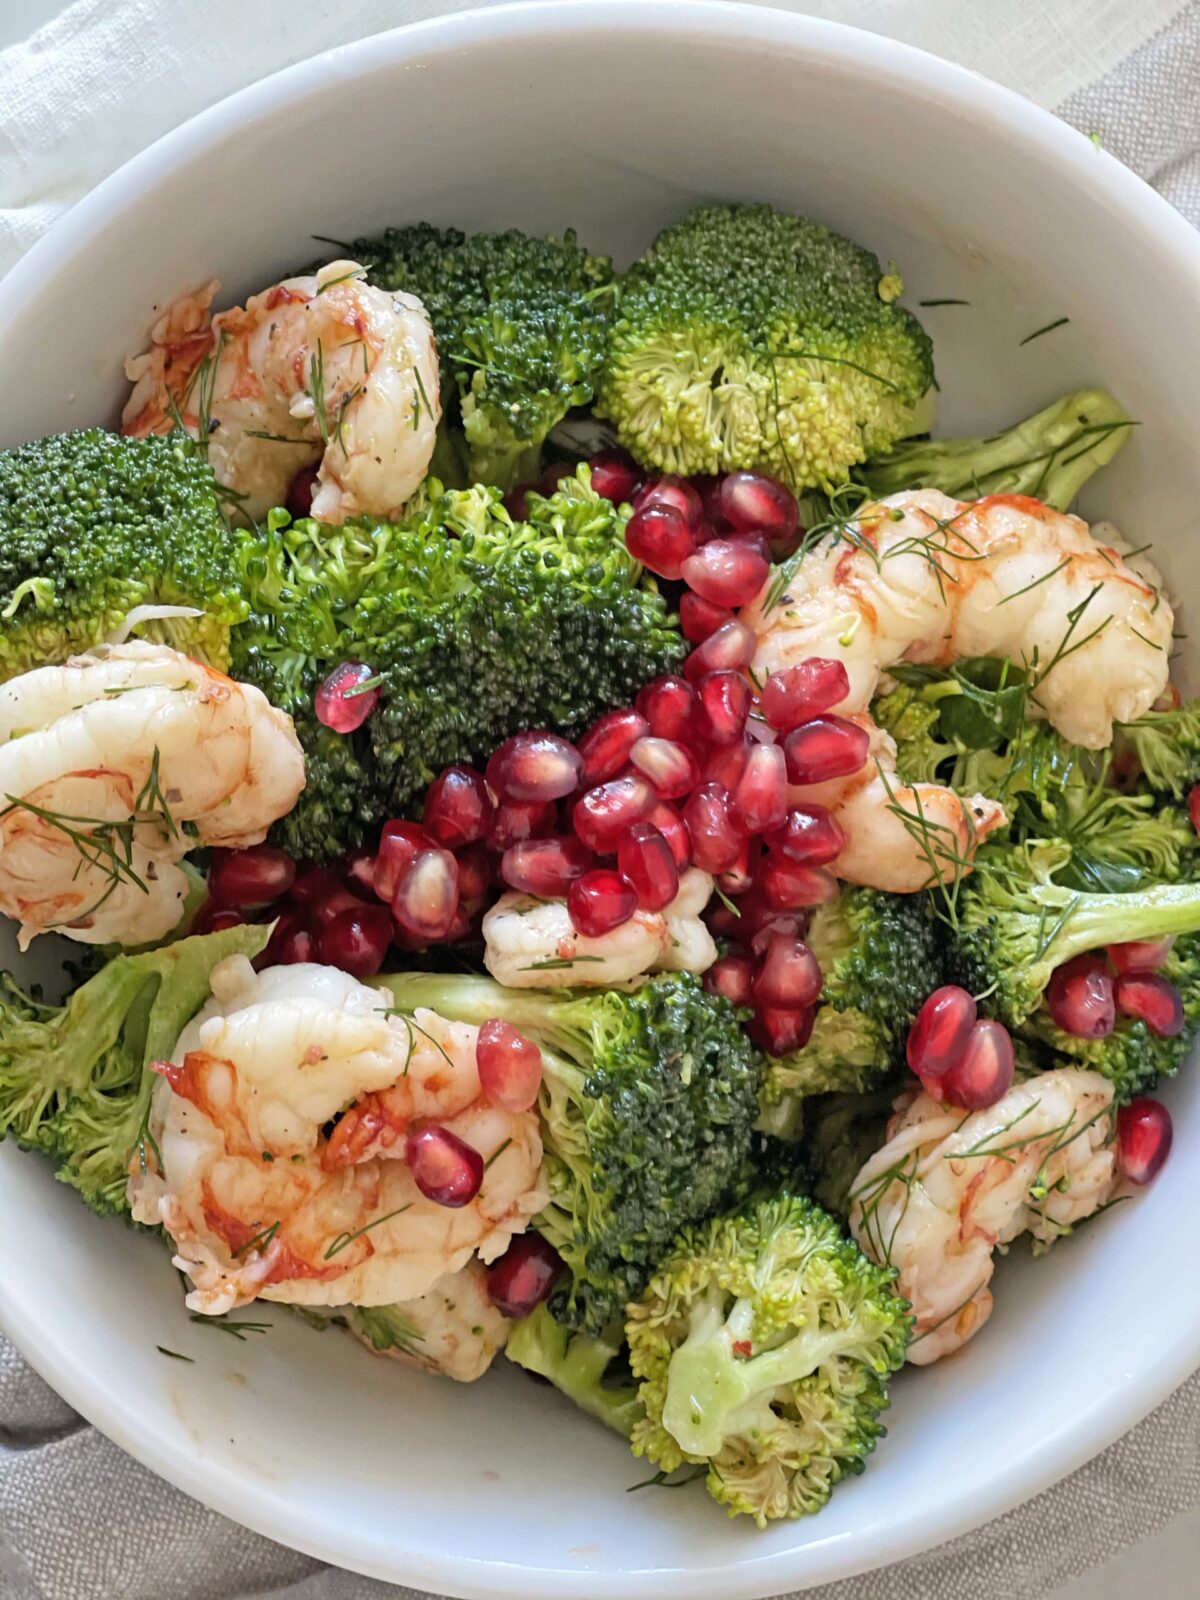 Easy Shrimp and Broccoli Salad. This is a perfect busy night dinner that has yummy leftovers. Broccoli, shrimp, pomegranates, Dijon mustard, and herbs. This is an easy Summer salad for a pool party. Happy Salad eating! www.ChopHappy.com #saladrecipe #broccolisalad